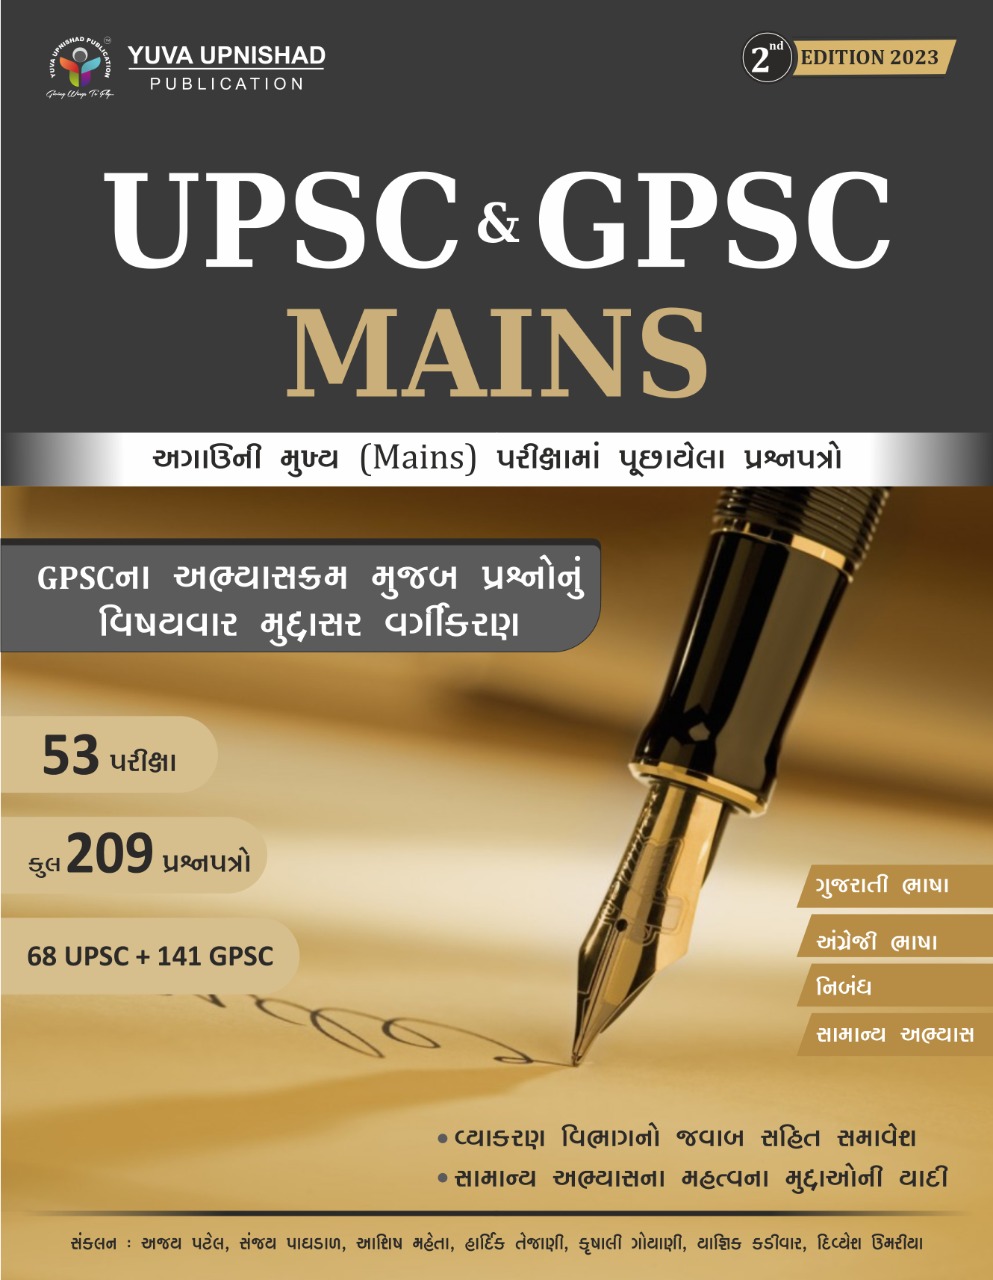 UPSC and GPSC Mains Old Papers 2nd edition | Yuva Upnishad Publication